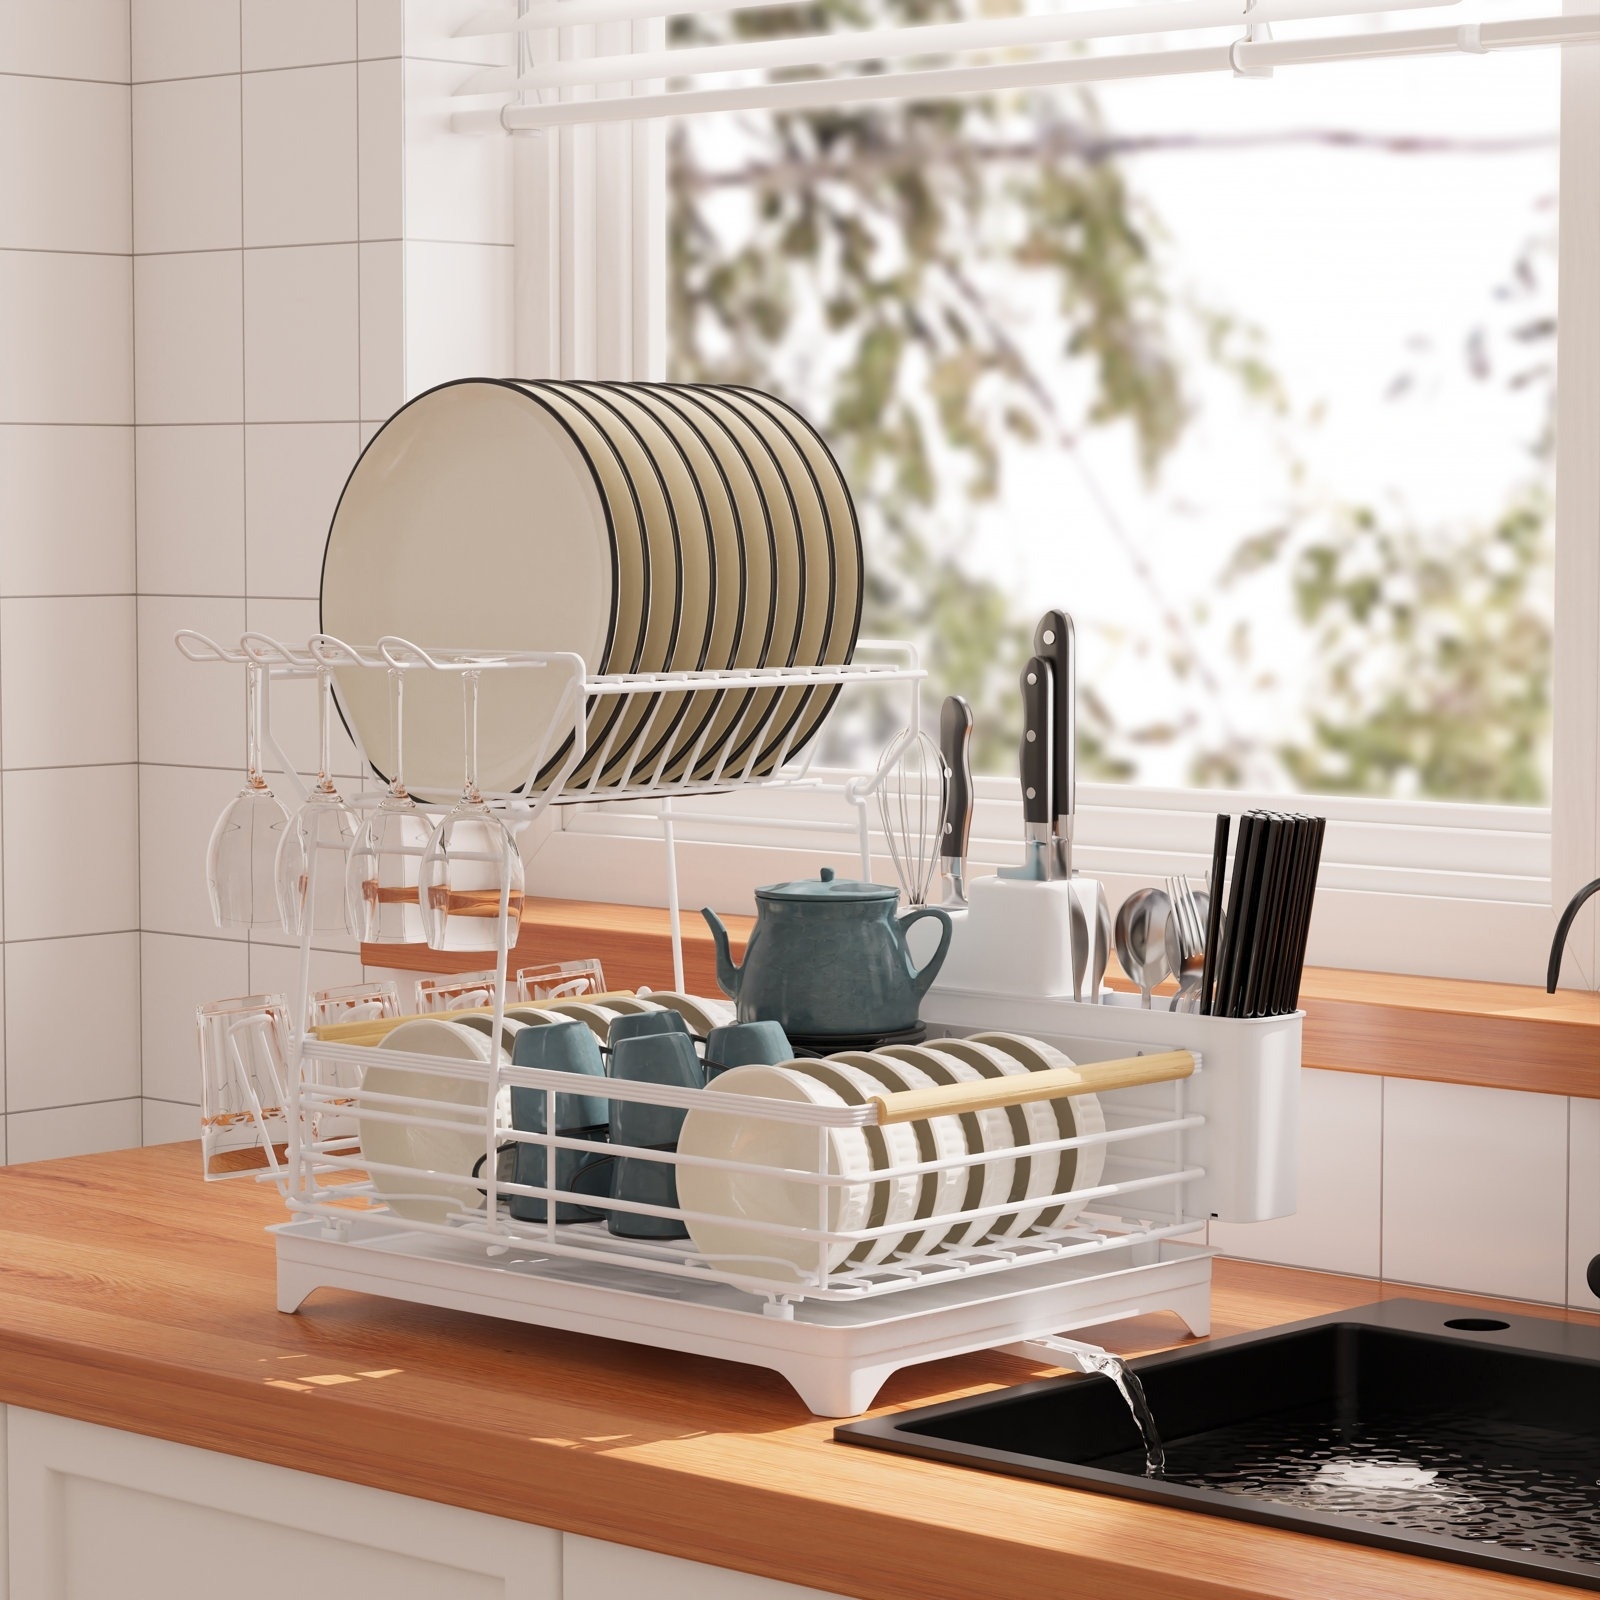 A white dish rack on a wooden countertop.